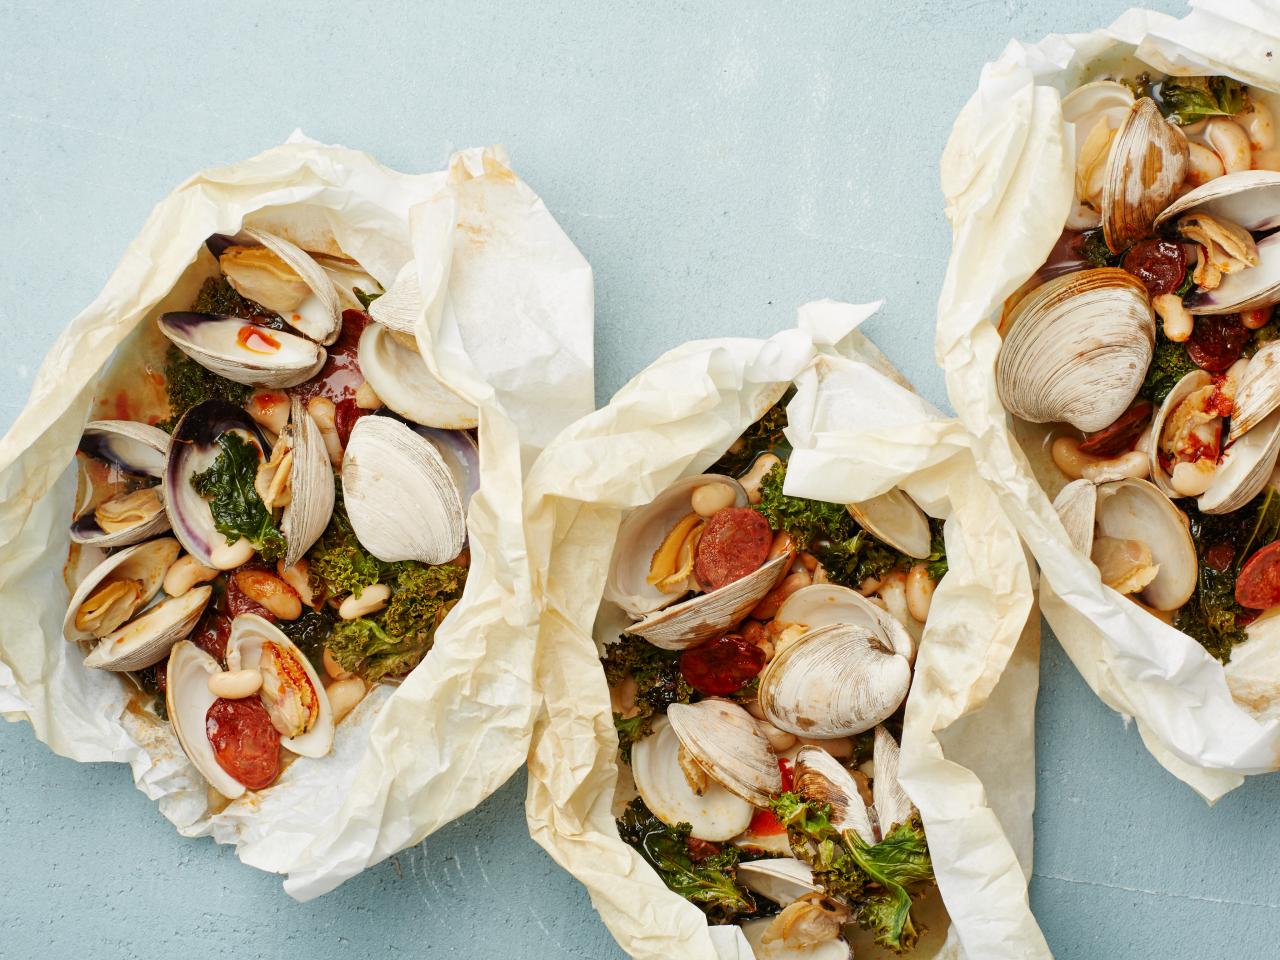 Parchment Paper Sheets - This Week for Dinner